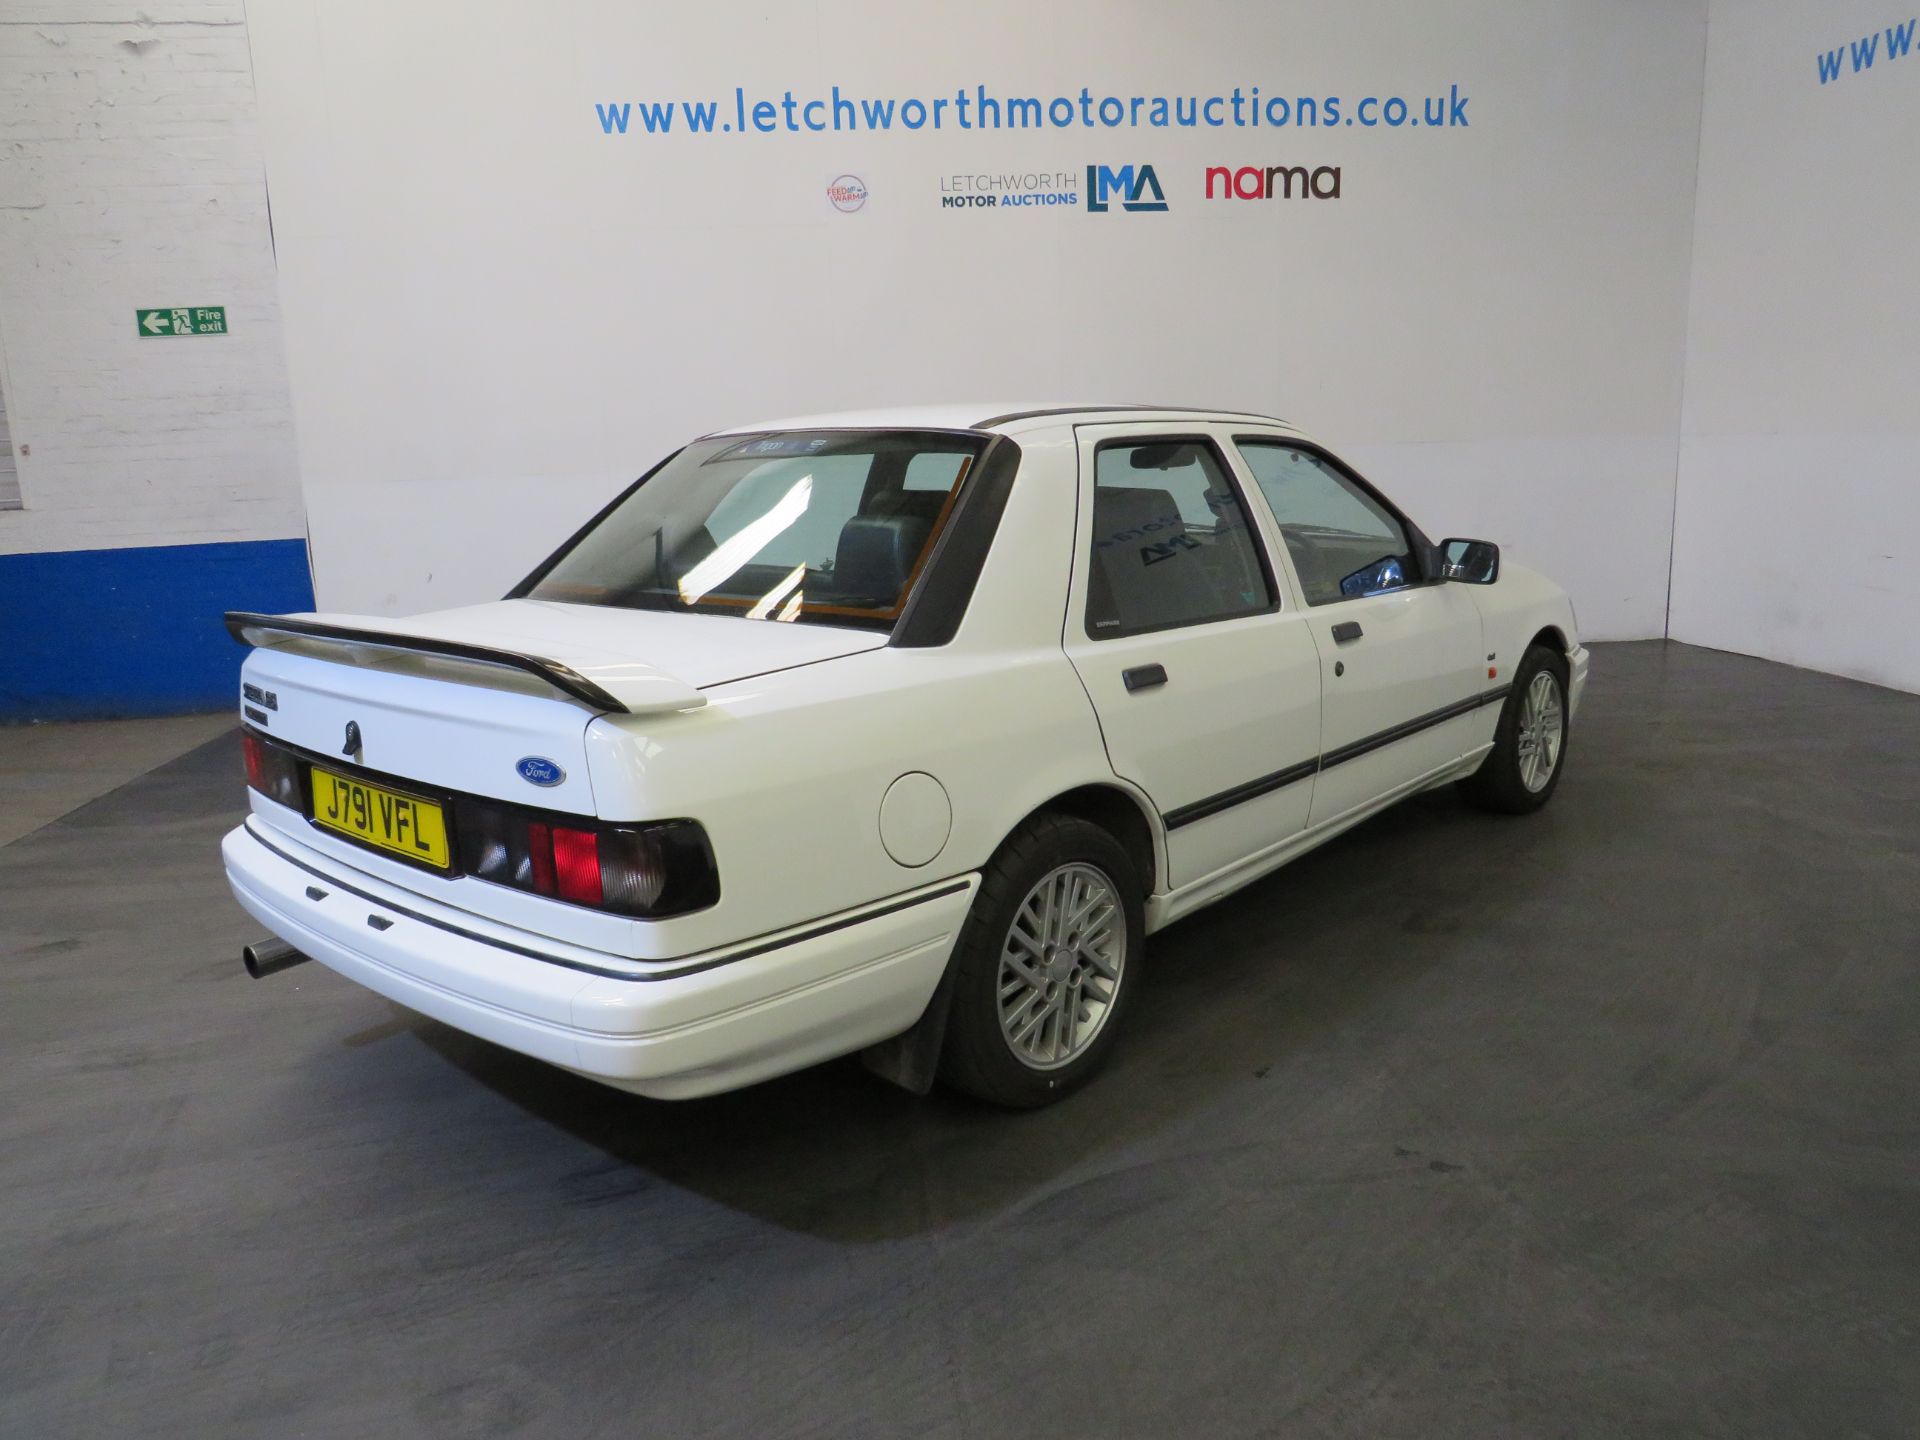 1991 Ford Sierra Sapphire Cosworth 4x4 - 1993cc - Image 6 of 19